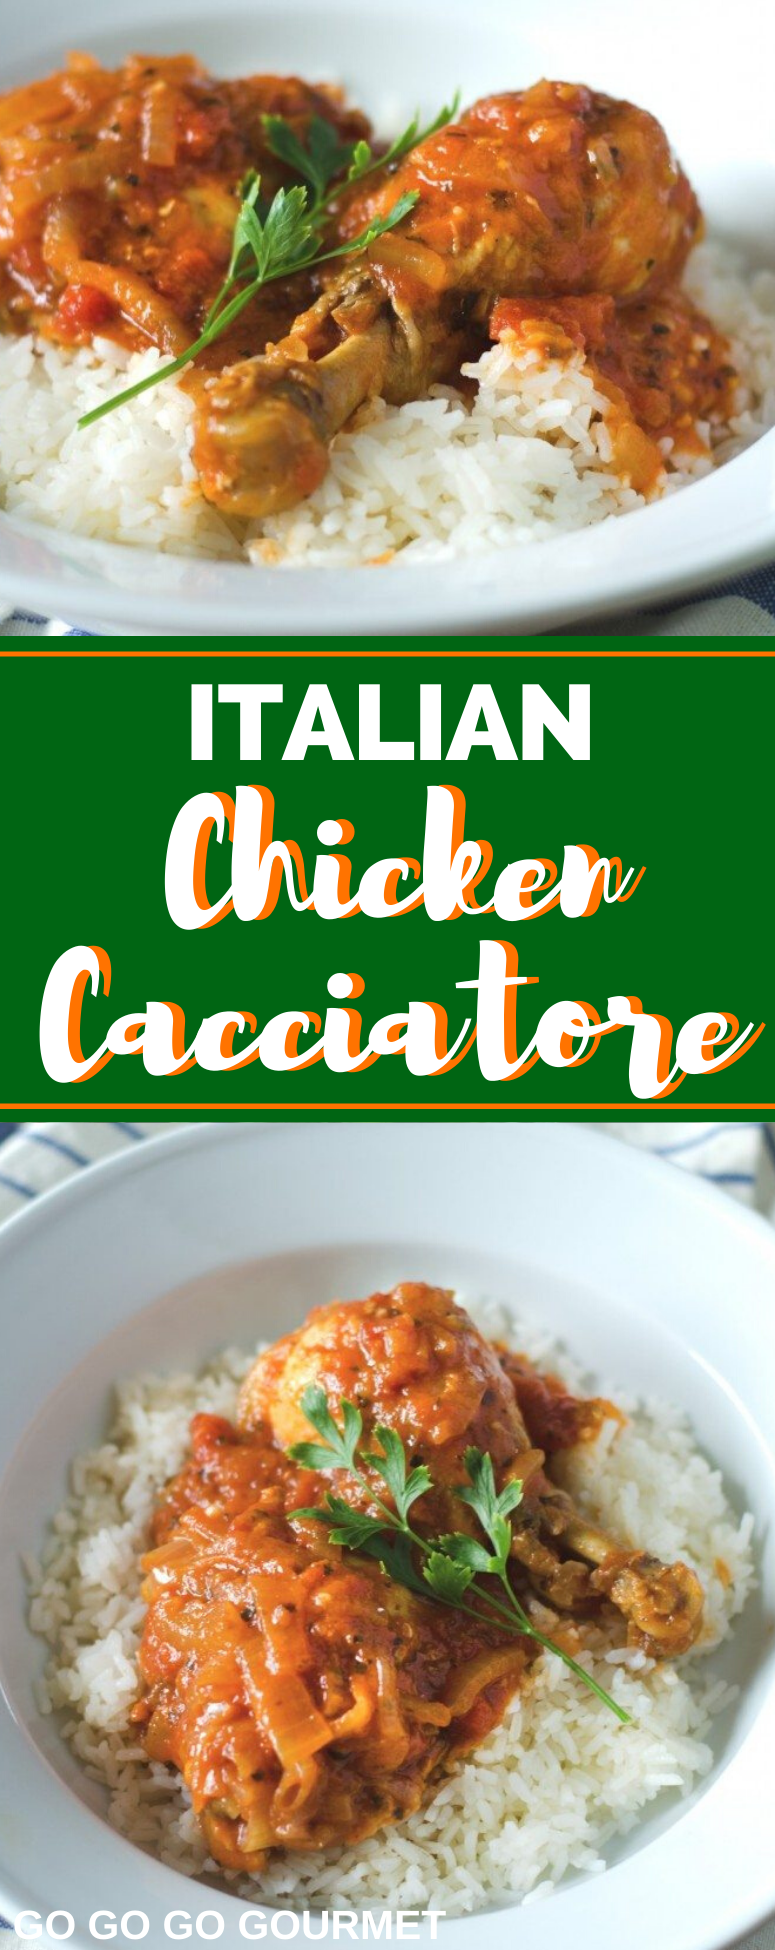 This Chicken Cacciatore is an incredibly easy dinner to put together! It will be your go-to recipe when you have no dinner plan, because you'll almost always have all the ingredients in your kitchen! #gogogogourmet #chickencacciatore #italianrecipes #easyweeknightdinners via @gogogogourmet